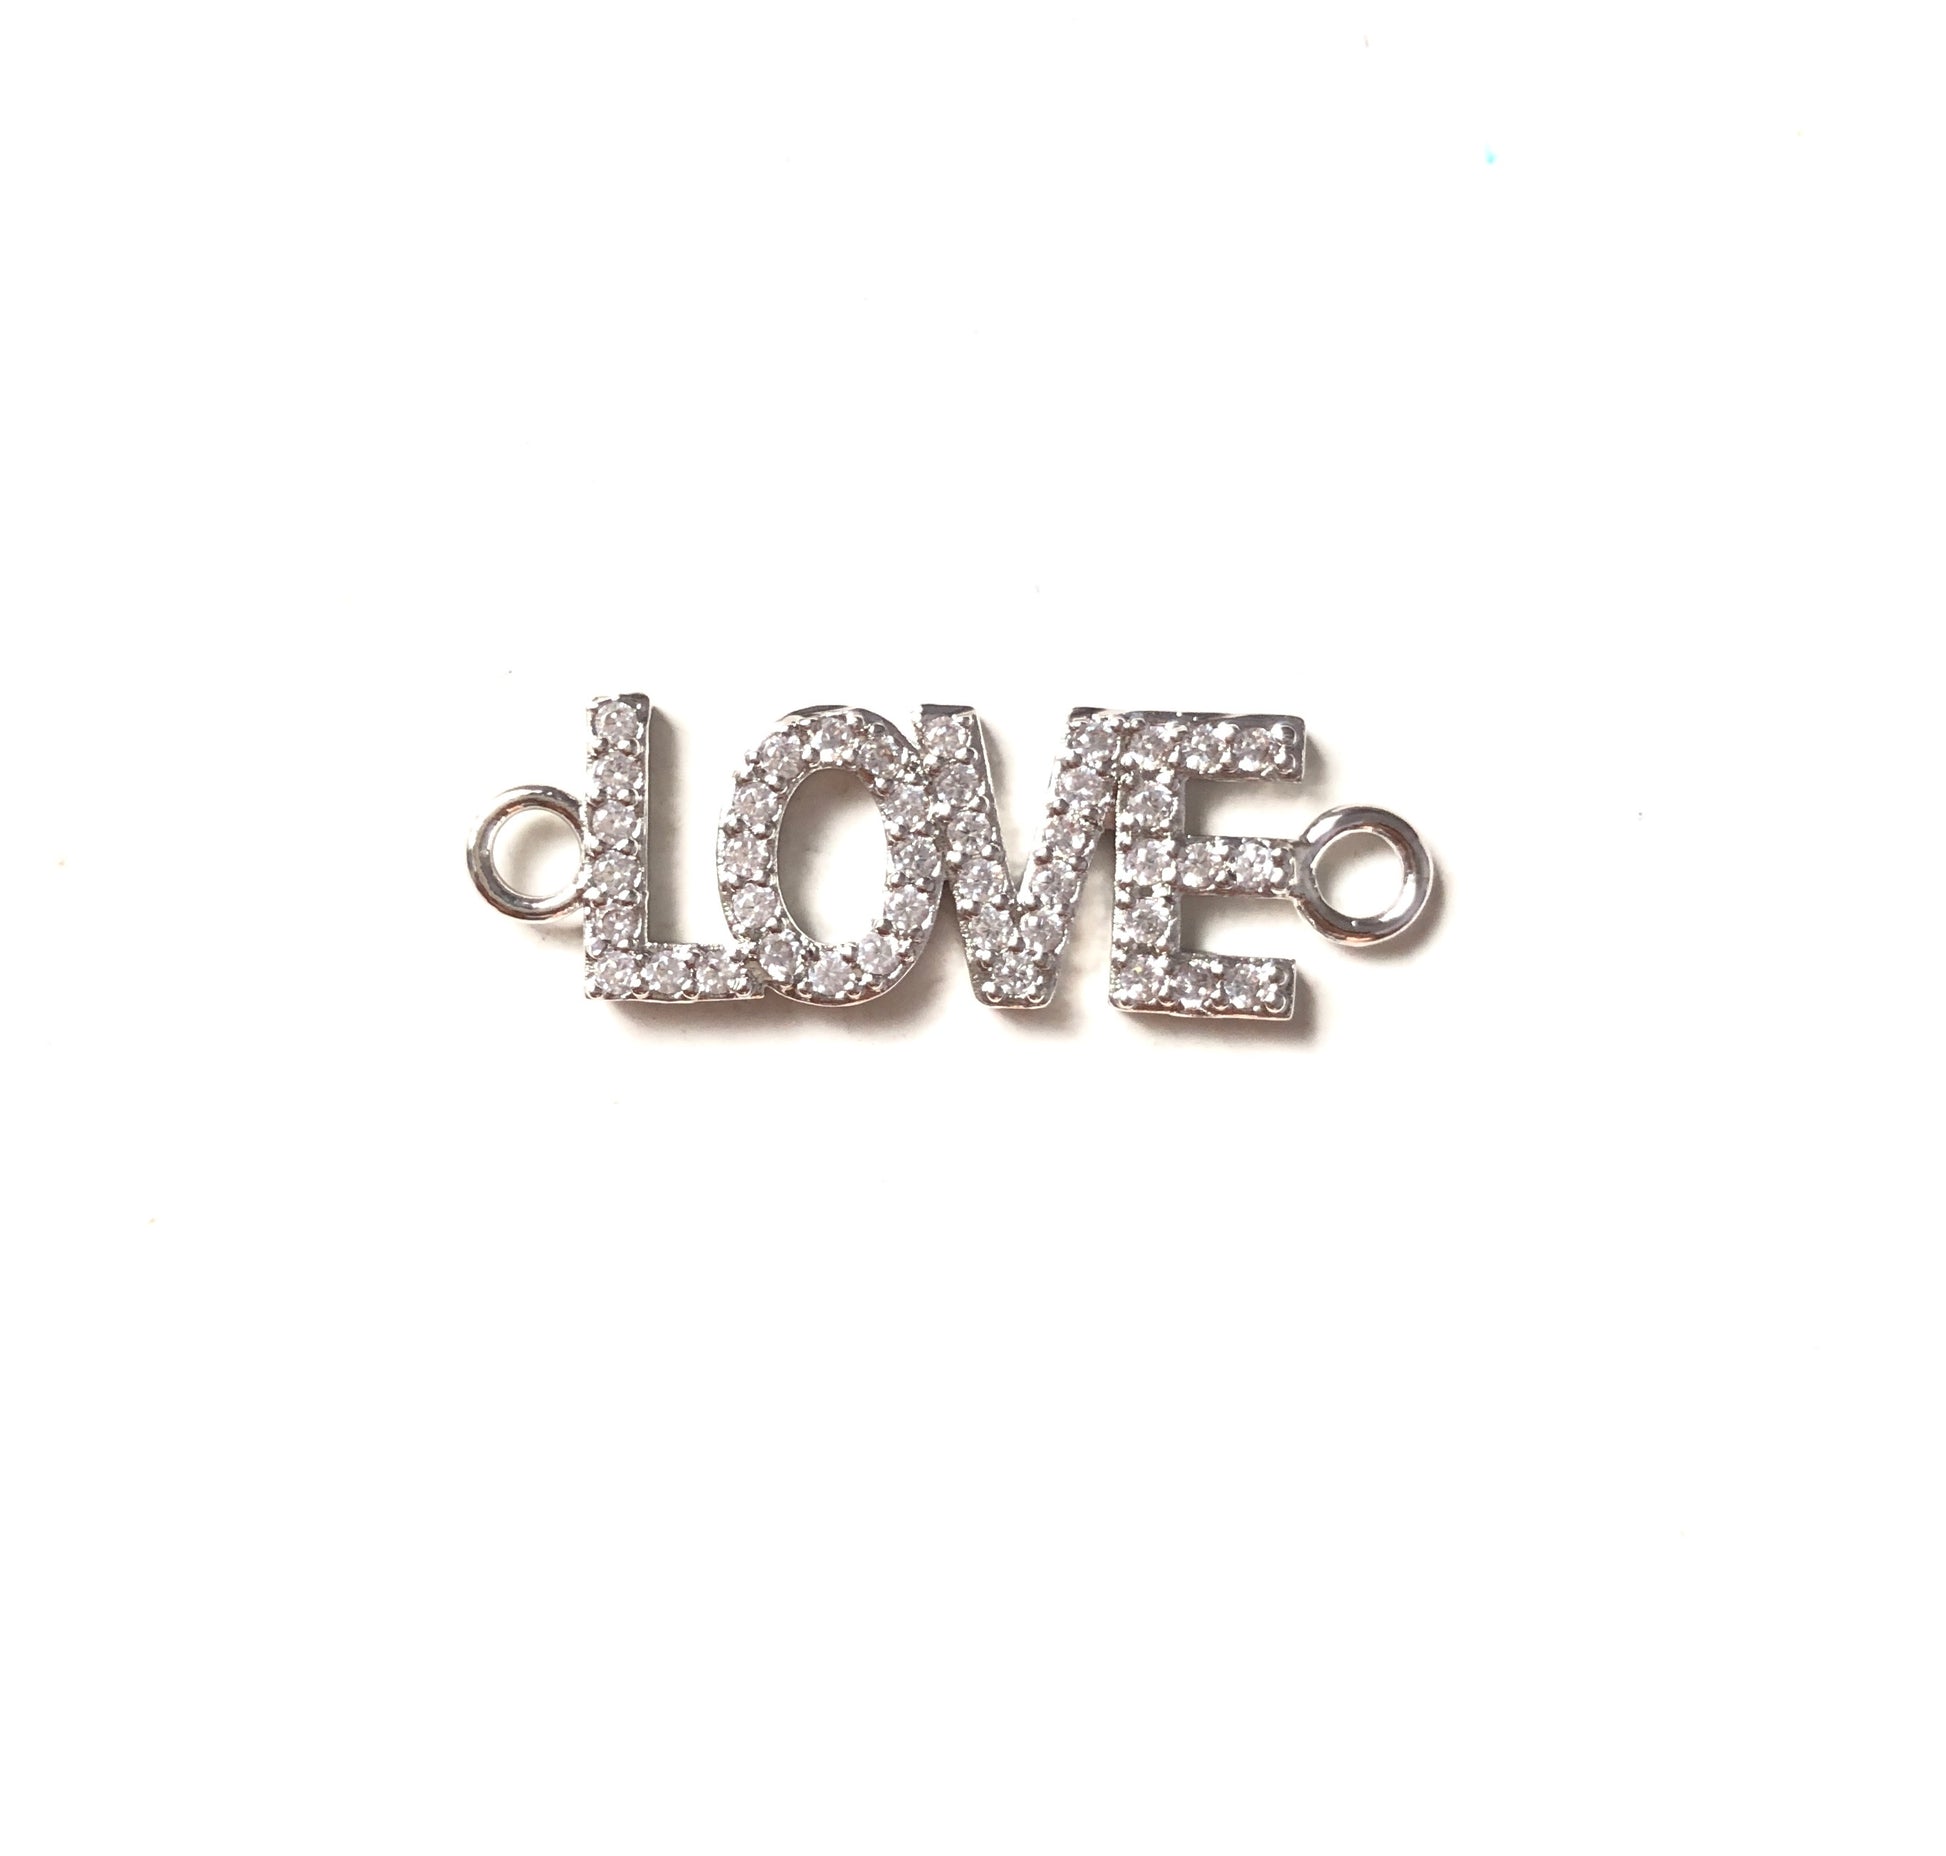 10pcs/lot 33*10mm CZ Paved Love Word Connectors Silver CZ Paved Connectors Love Letters Word Connectors Charms Beads Beyond